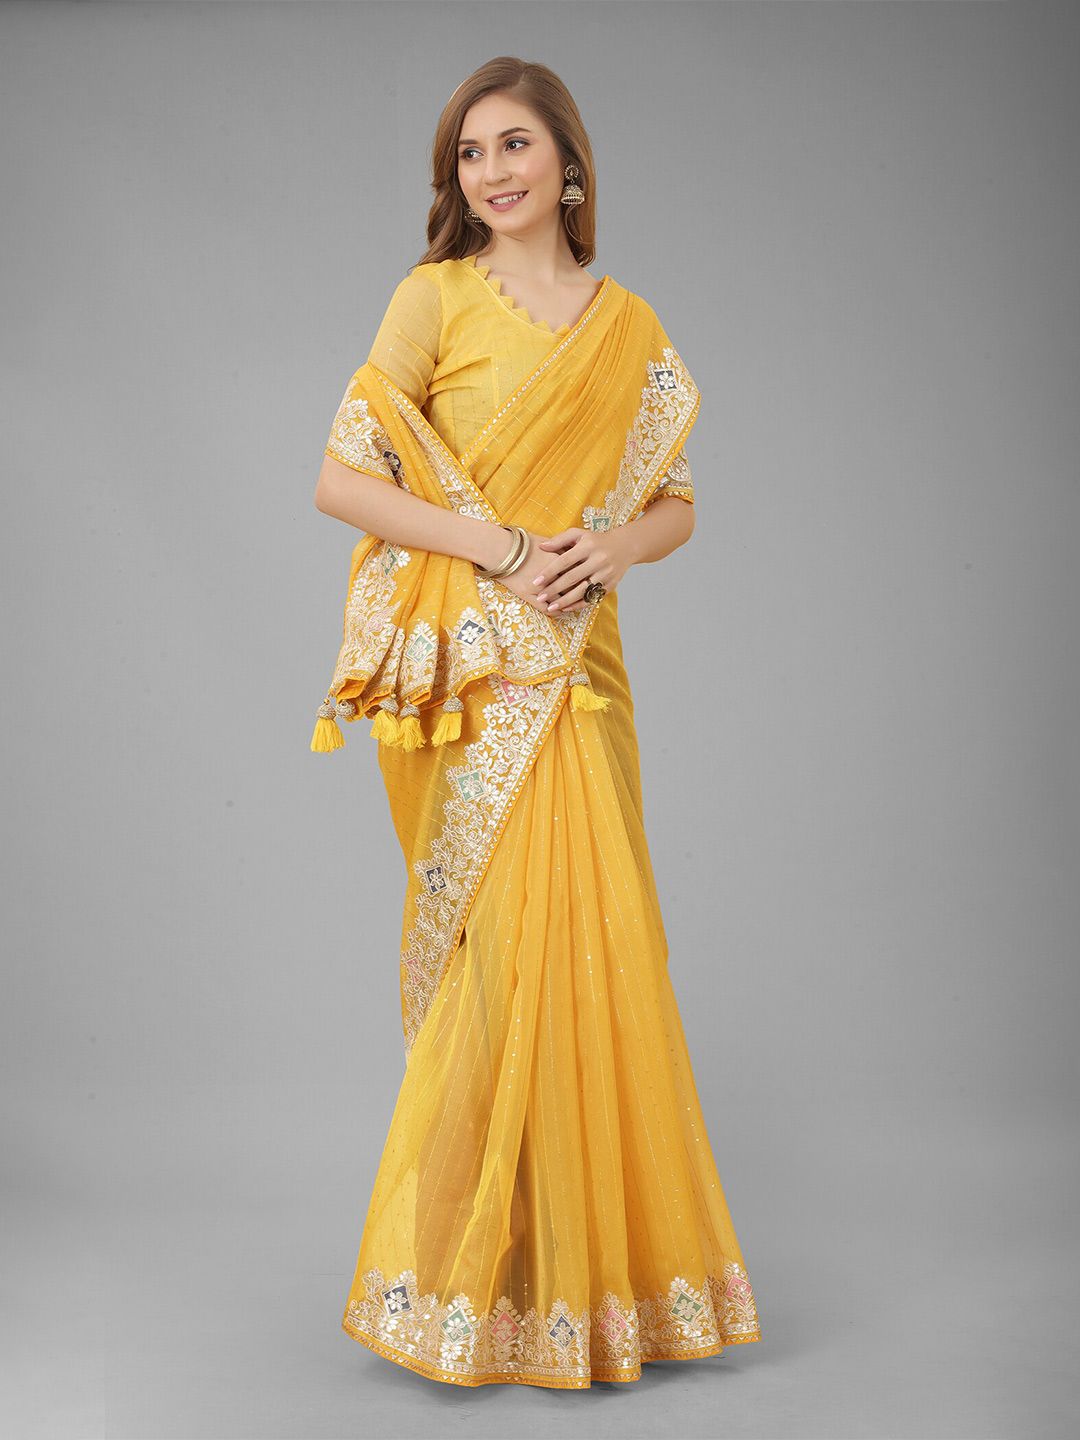 N N ENTERPRISE Yellow & Gold-Toned Embellished Embroidered Net Saree Price in India